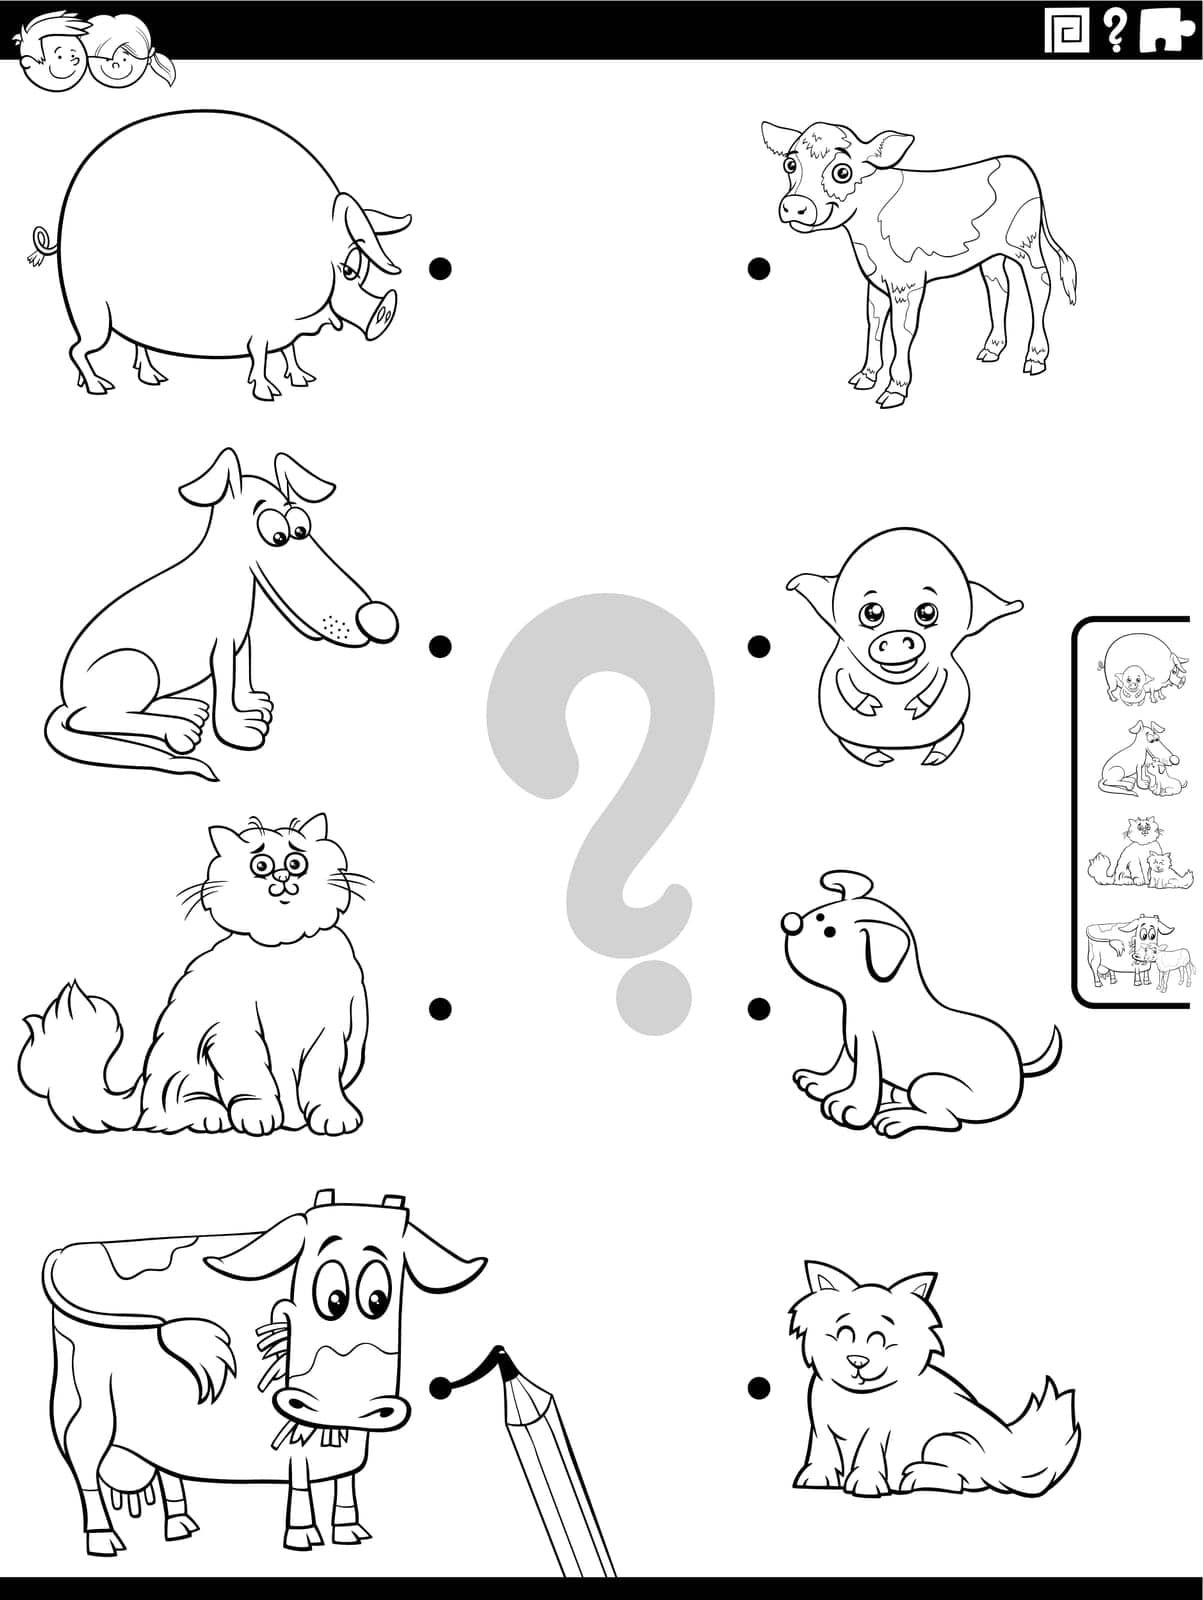 match cartoon animals and their babies game coloring page by izakowski